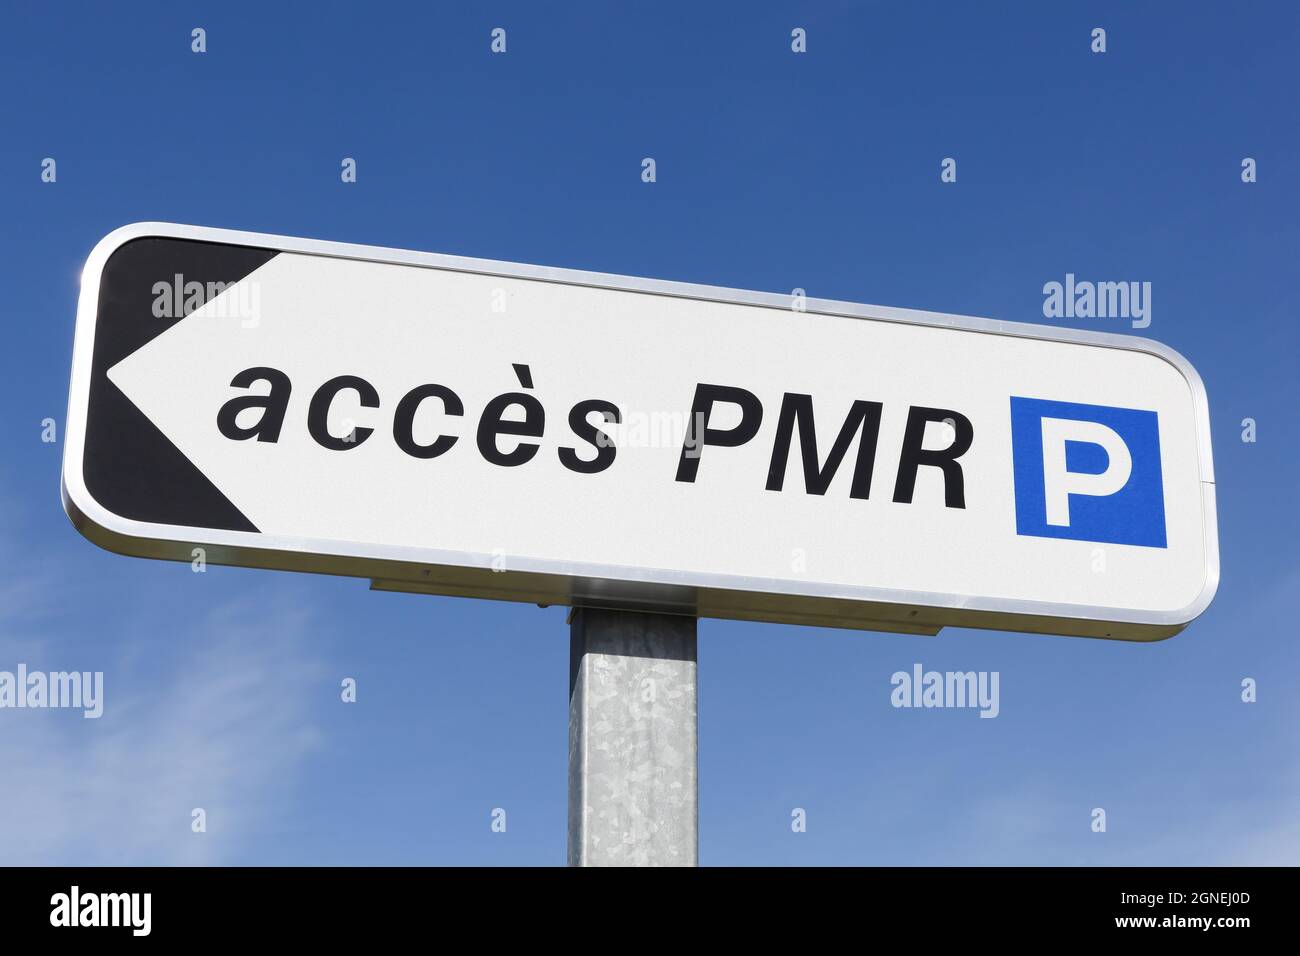 Access person with reduced mobility signpost in France Stock Photo